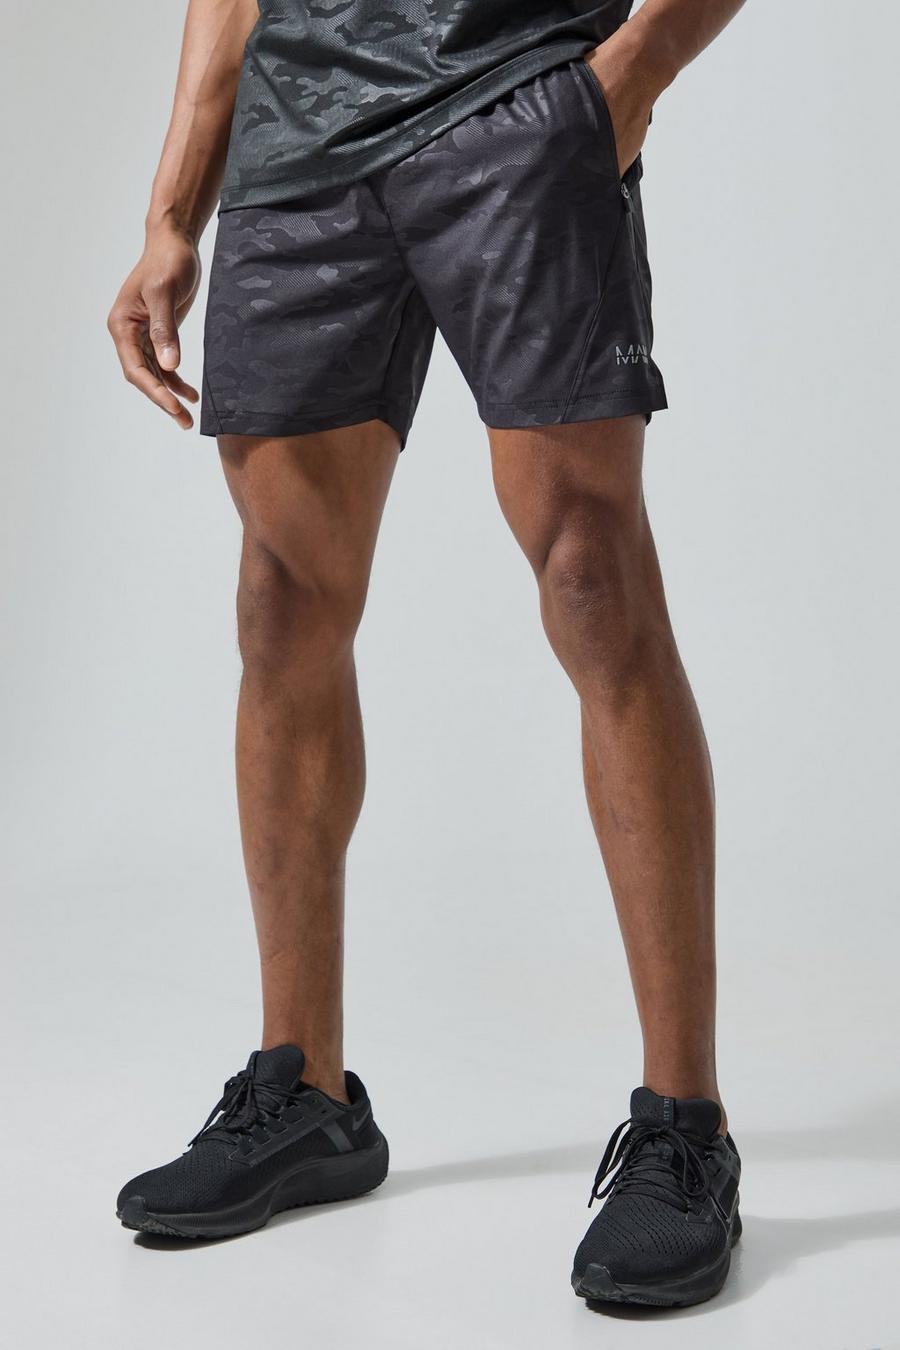 Man Active 5 Inch Camouflage Shorts, Black image number 1